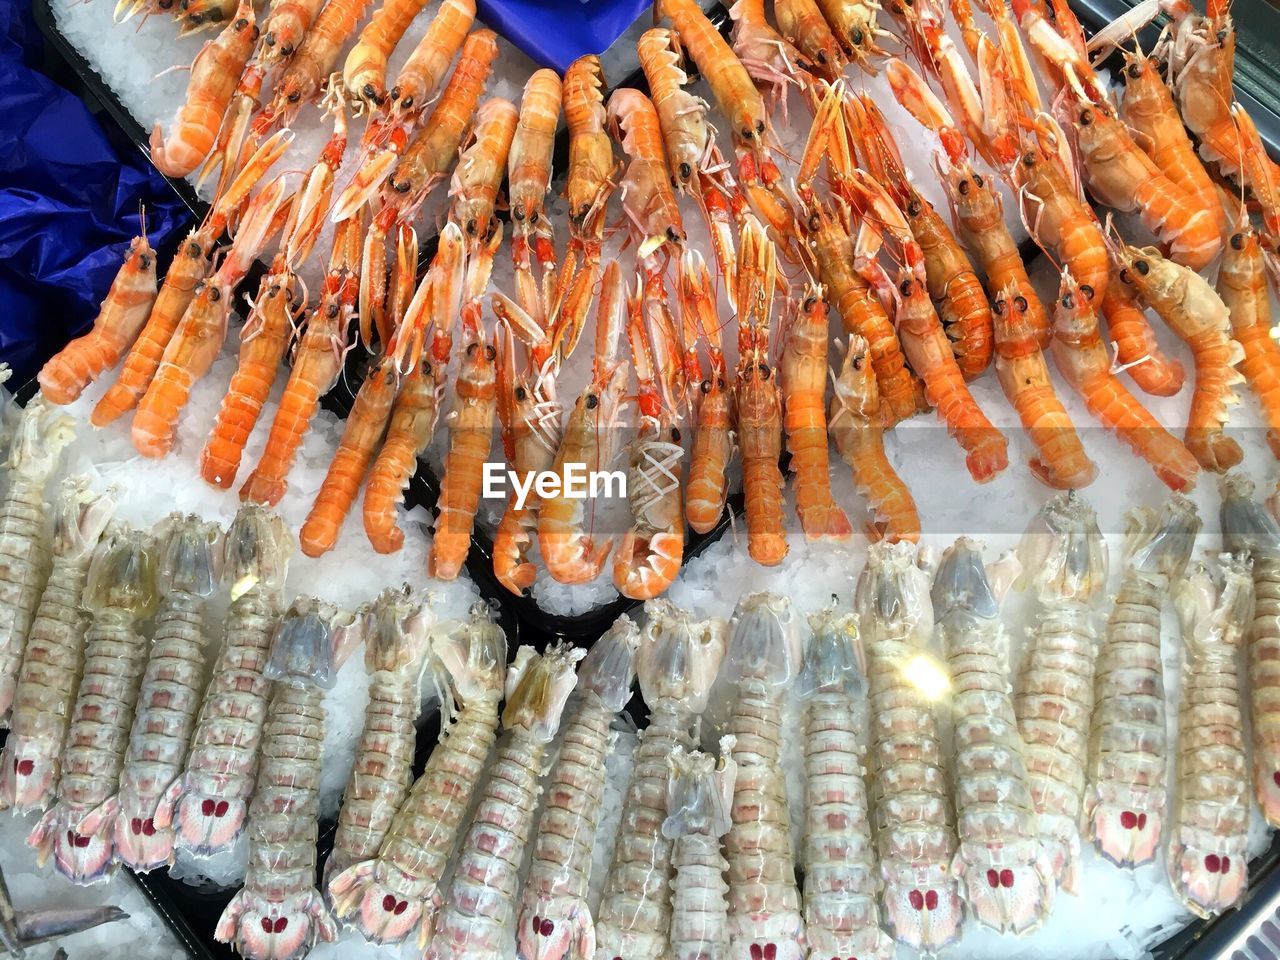 High angle view of prawns for sale in fish market